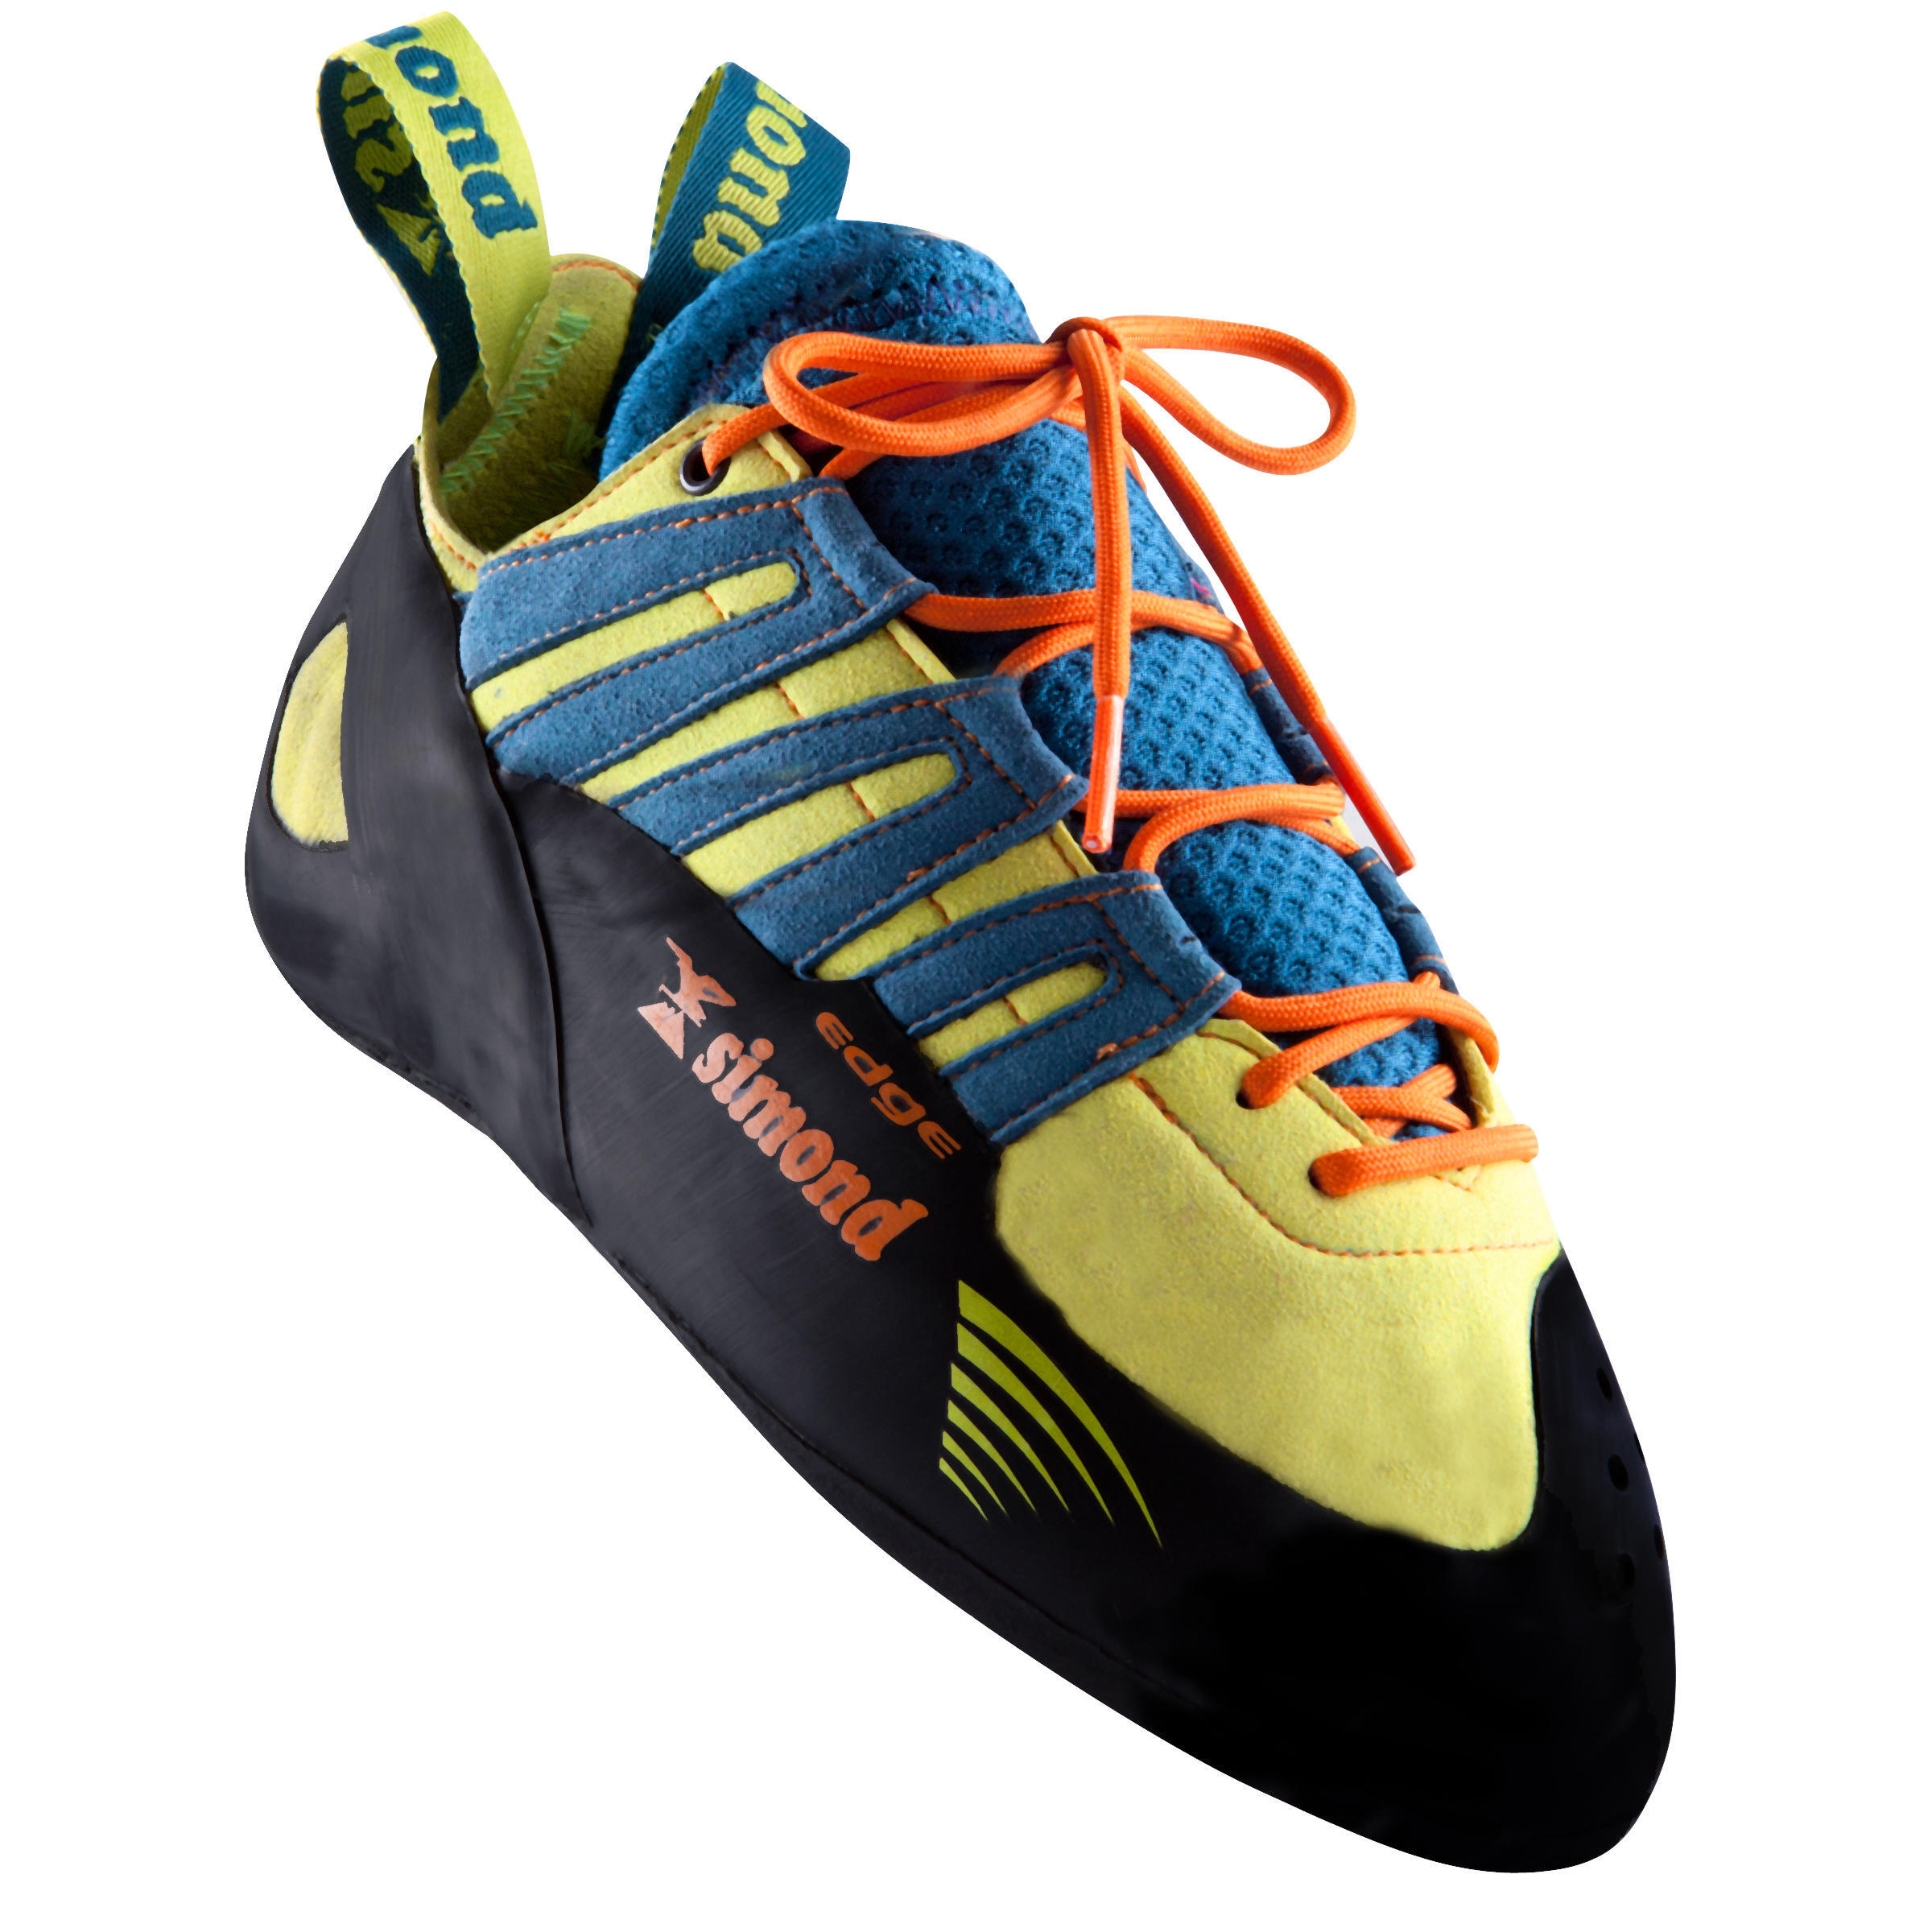 EDGE LACE-UP ADULT CLIMBING SHOES 4/14